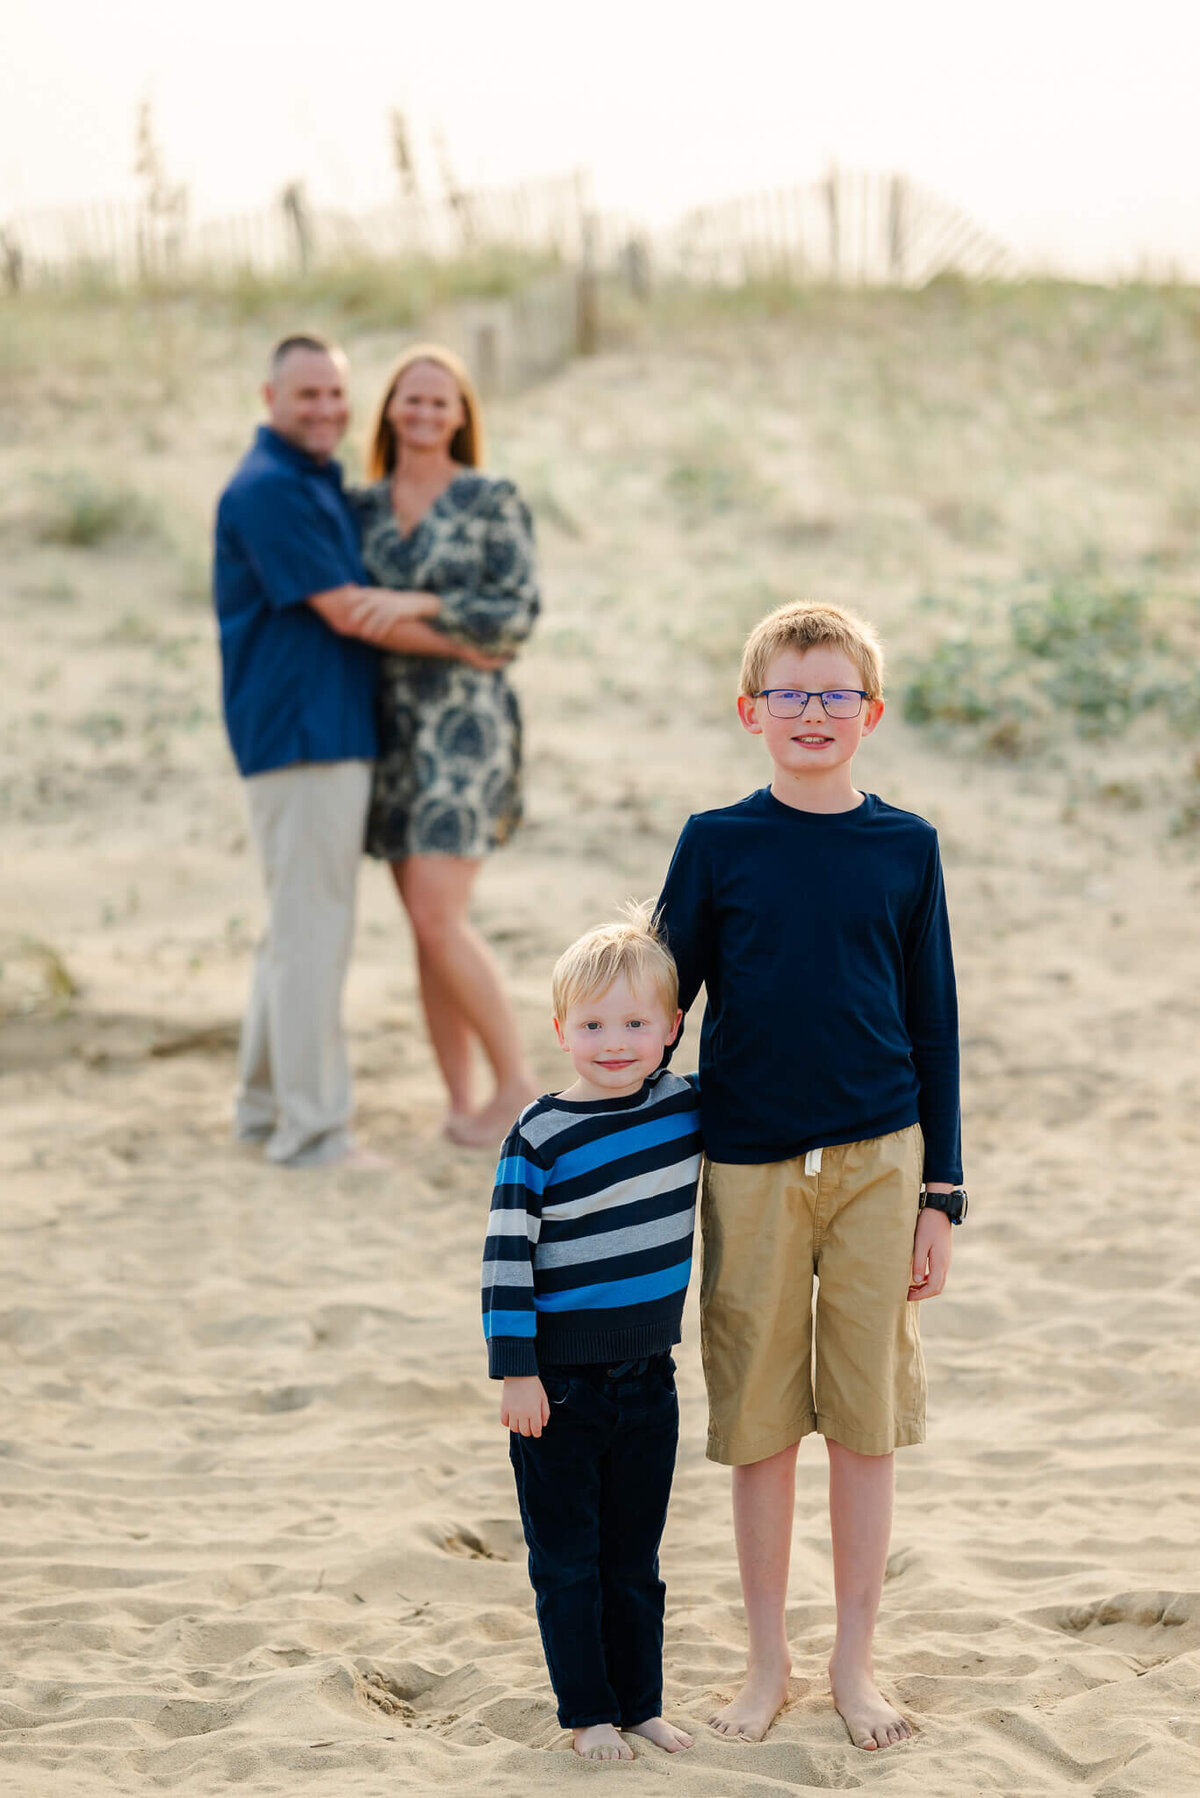 Two brothers put their arms around each other while their parents do the same behind them at a family session on the beach.